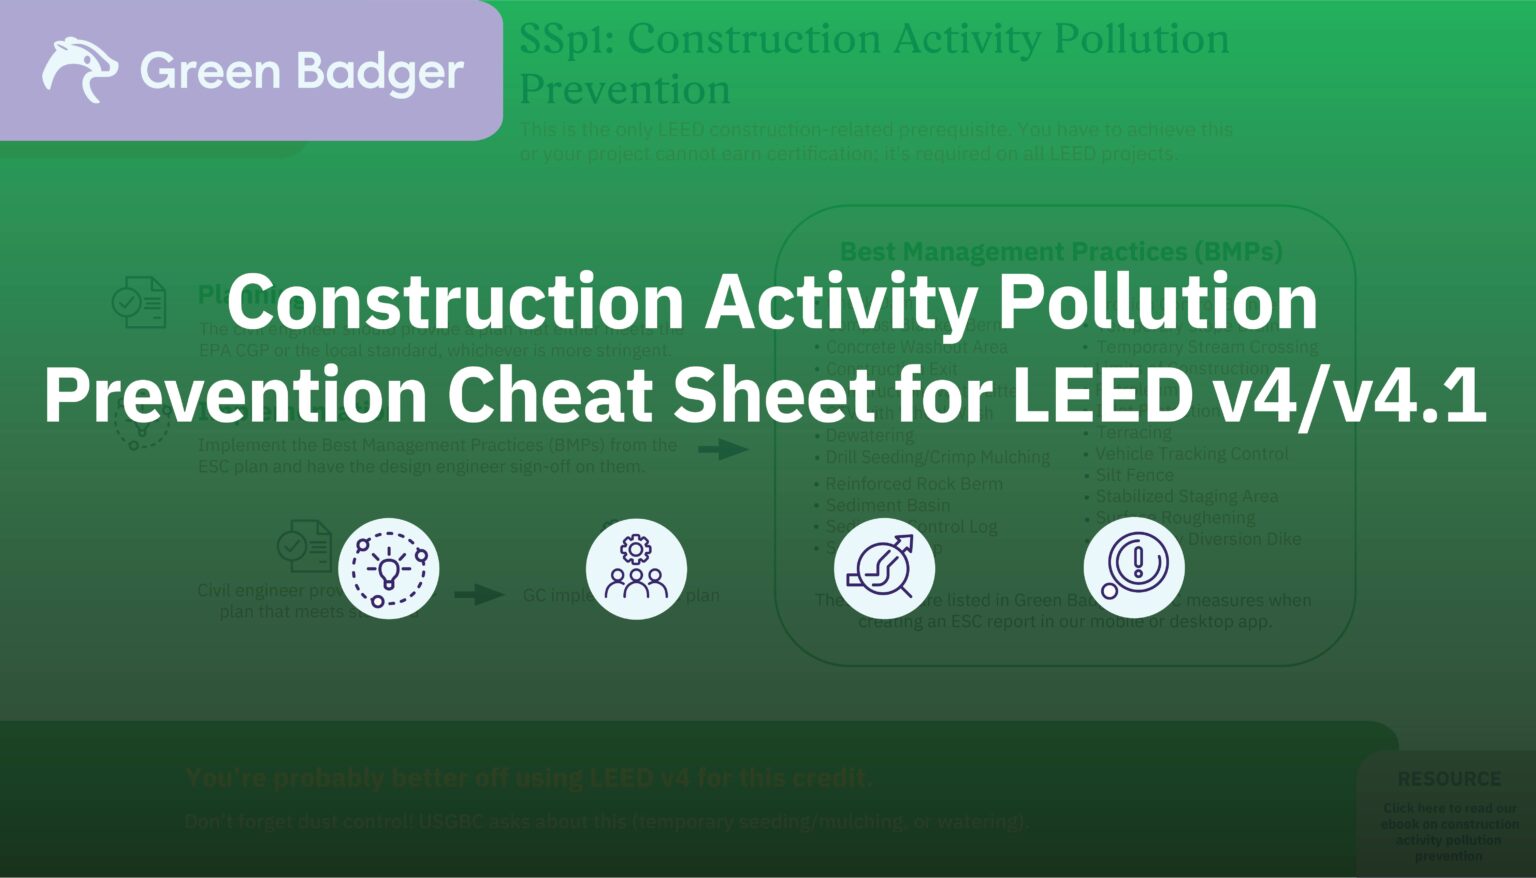 construction activity pollution cheat sheet thumbnail - updated